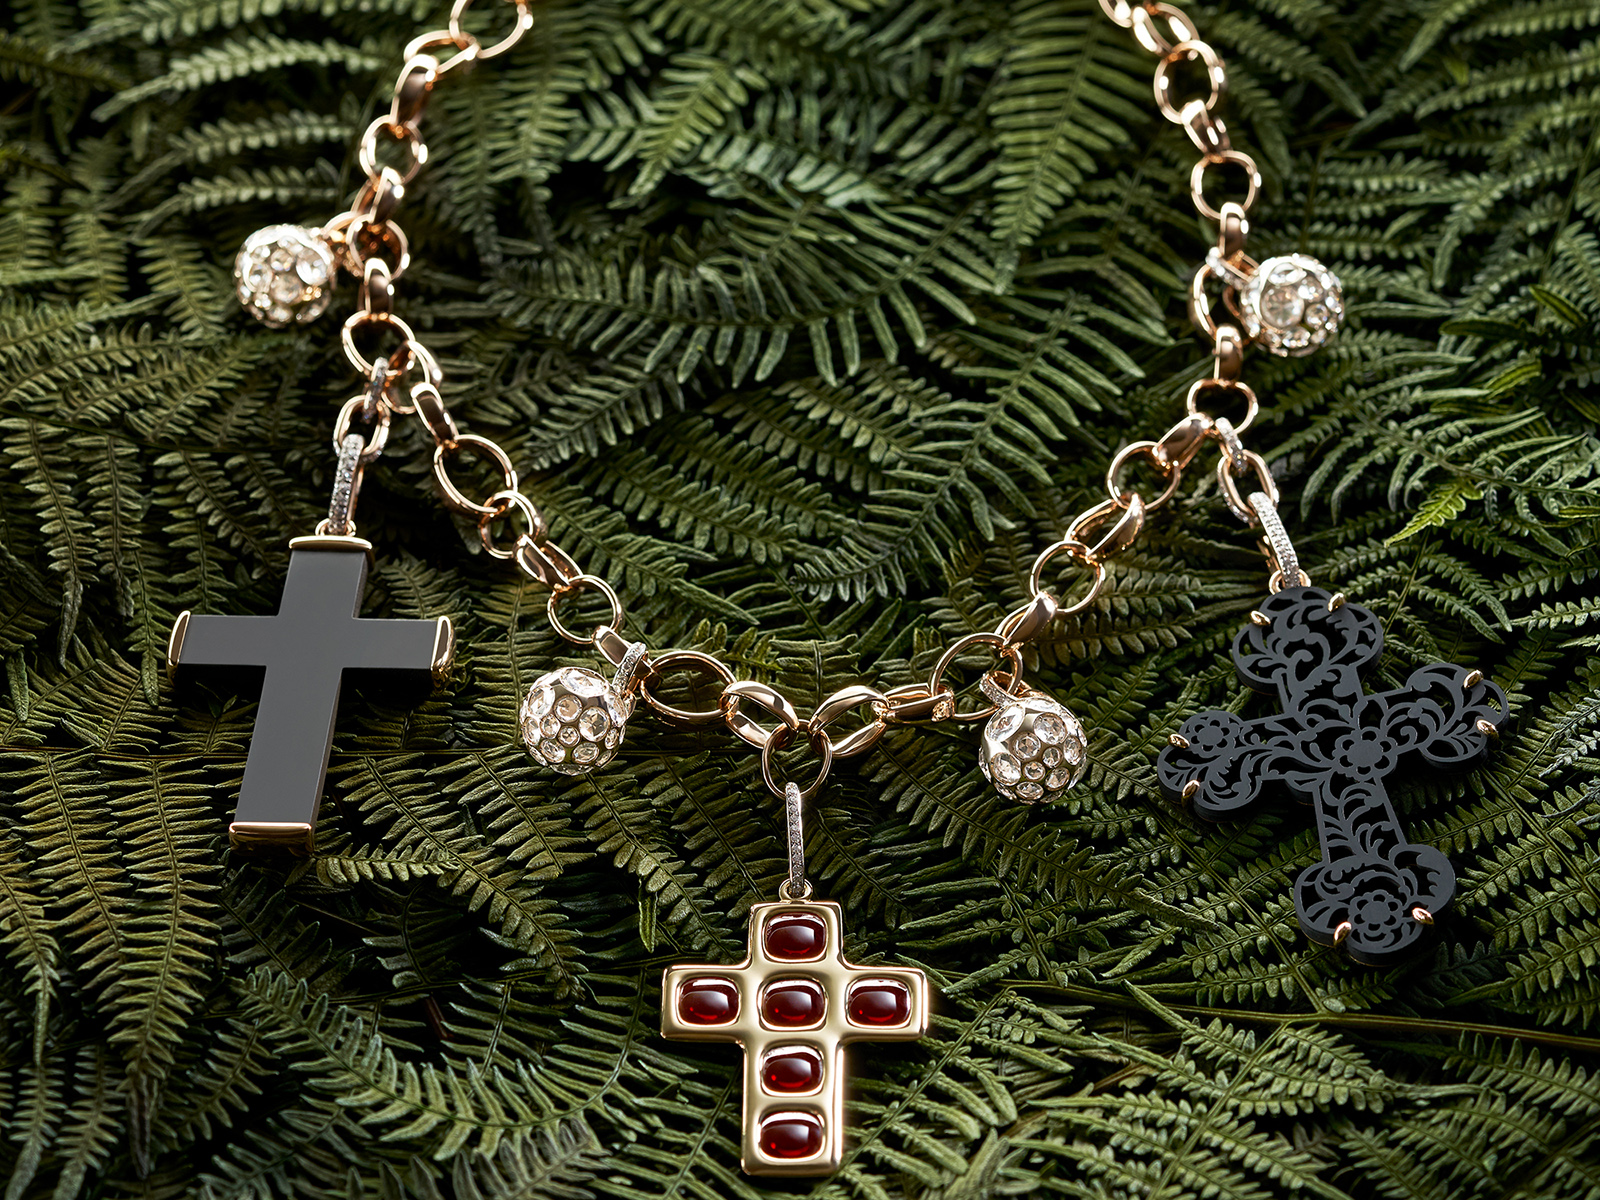 Necklace featuring three crosses against green fern background